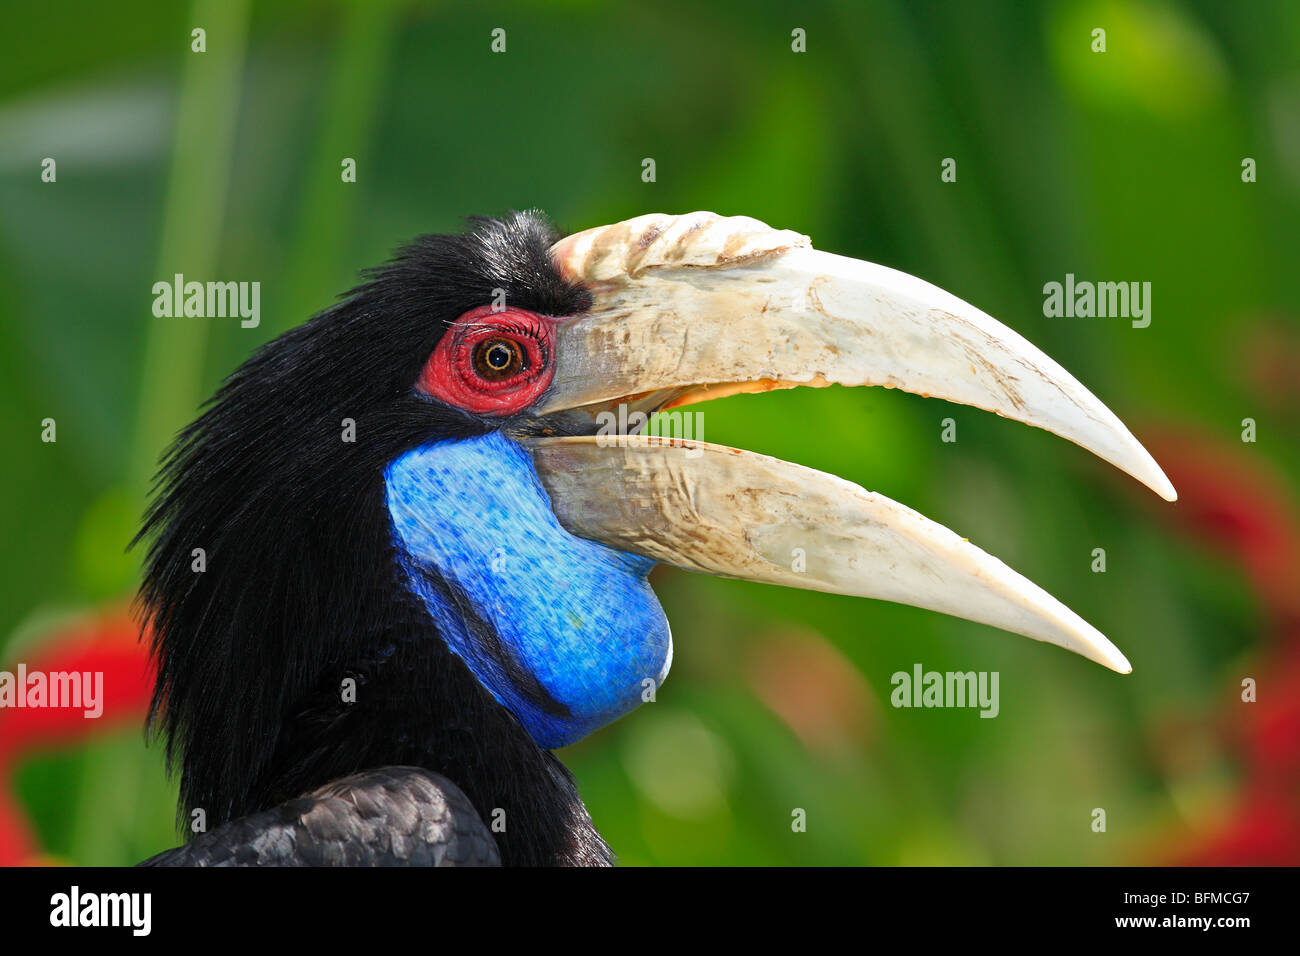 Female Wreathed Hornbill, also known as the bar-pouched wreathed hornbill, Rhyticeros undulatus Stock Photo